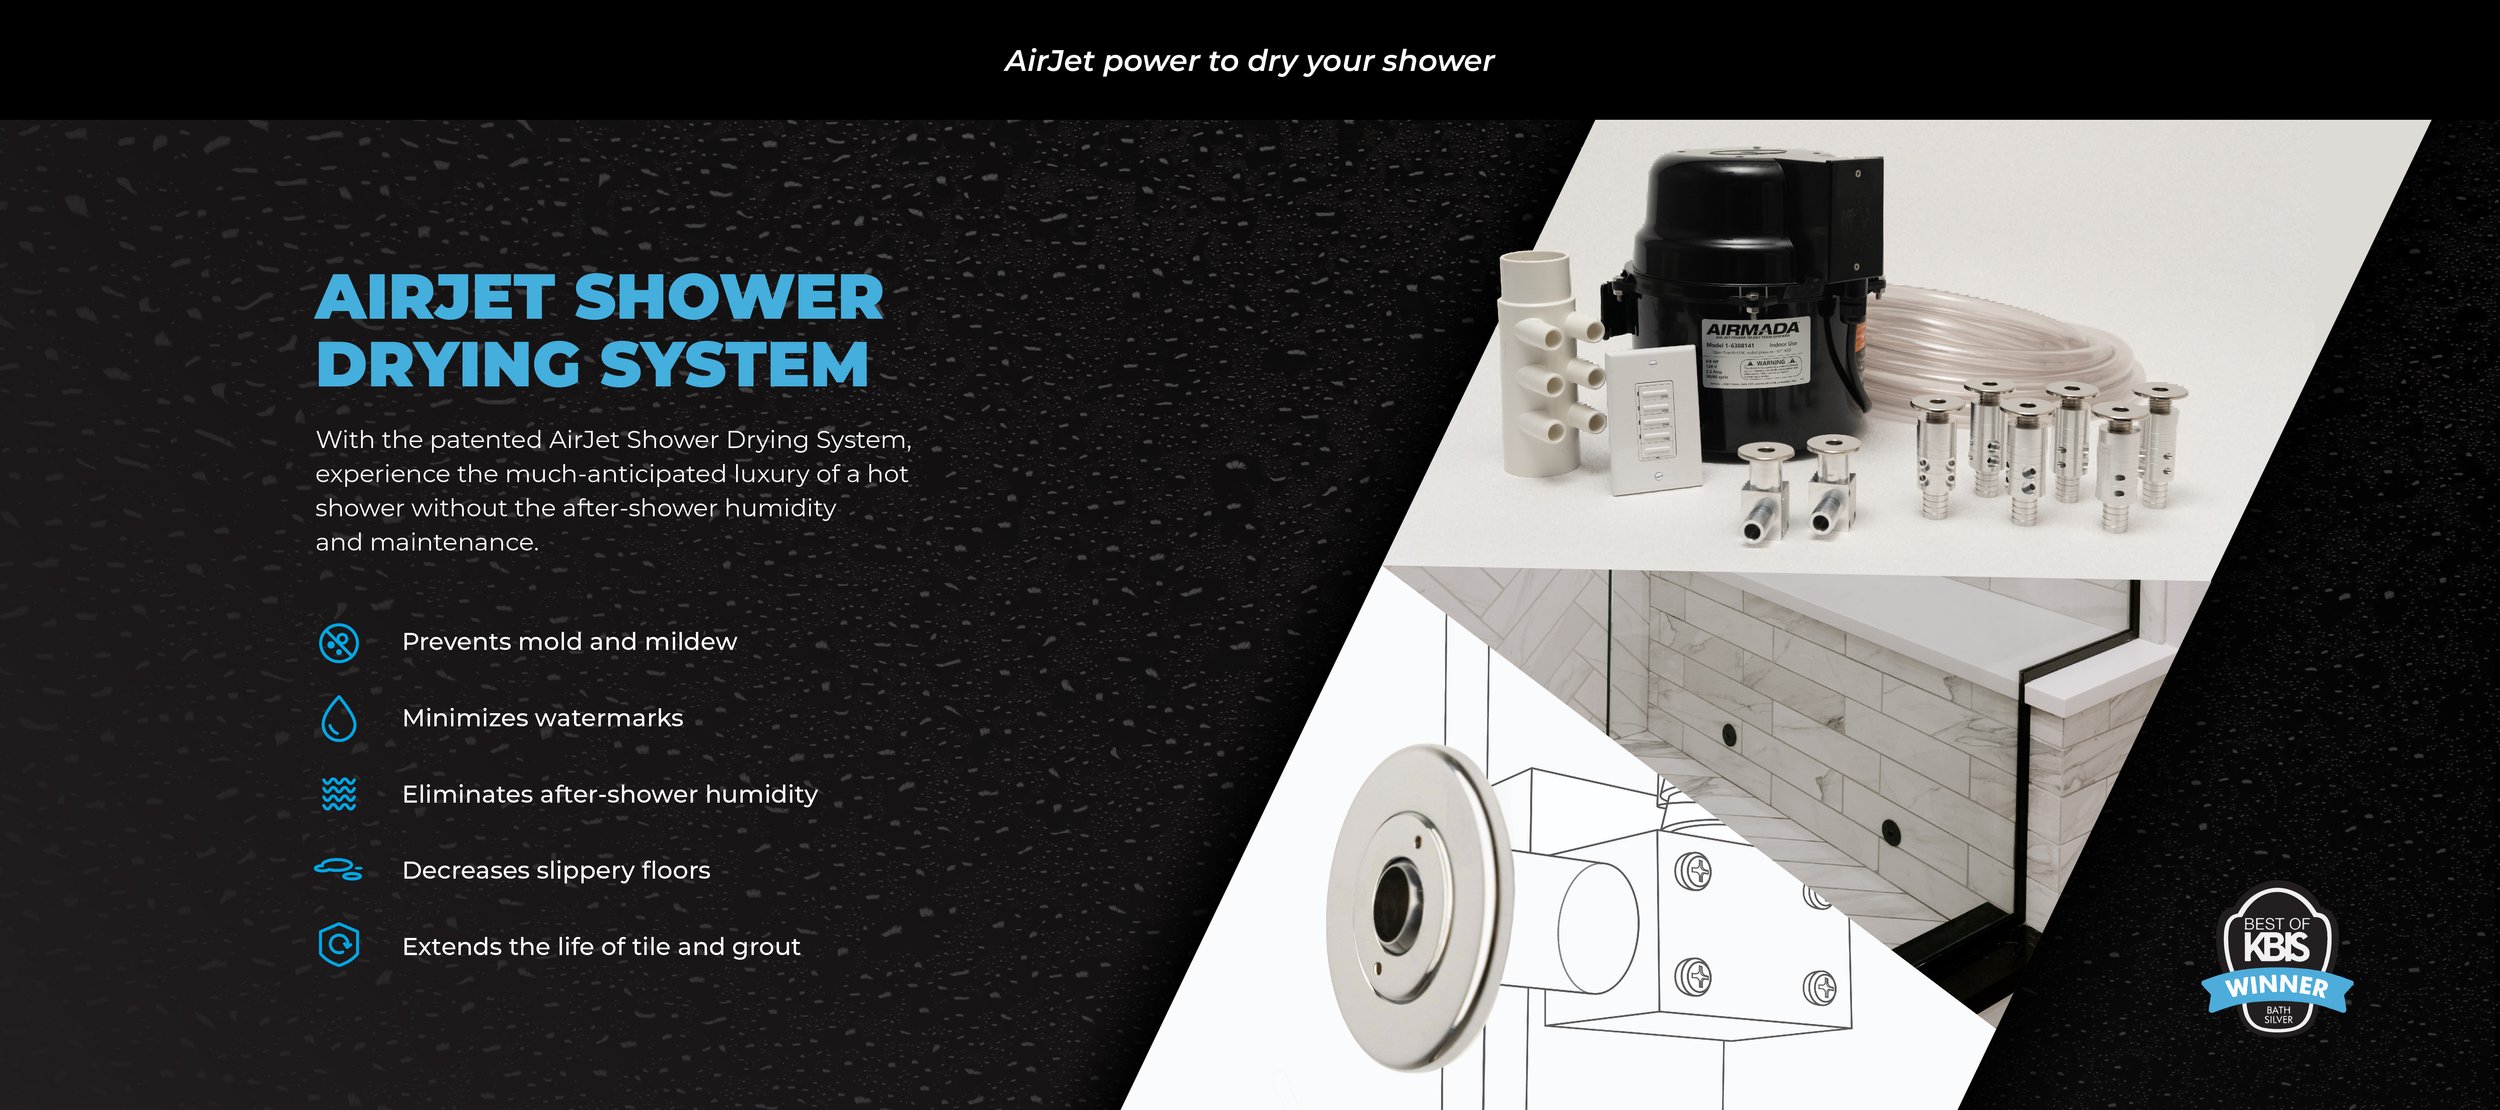 AirJet Drying System — Airmada - Shower Drying System